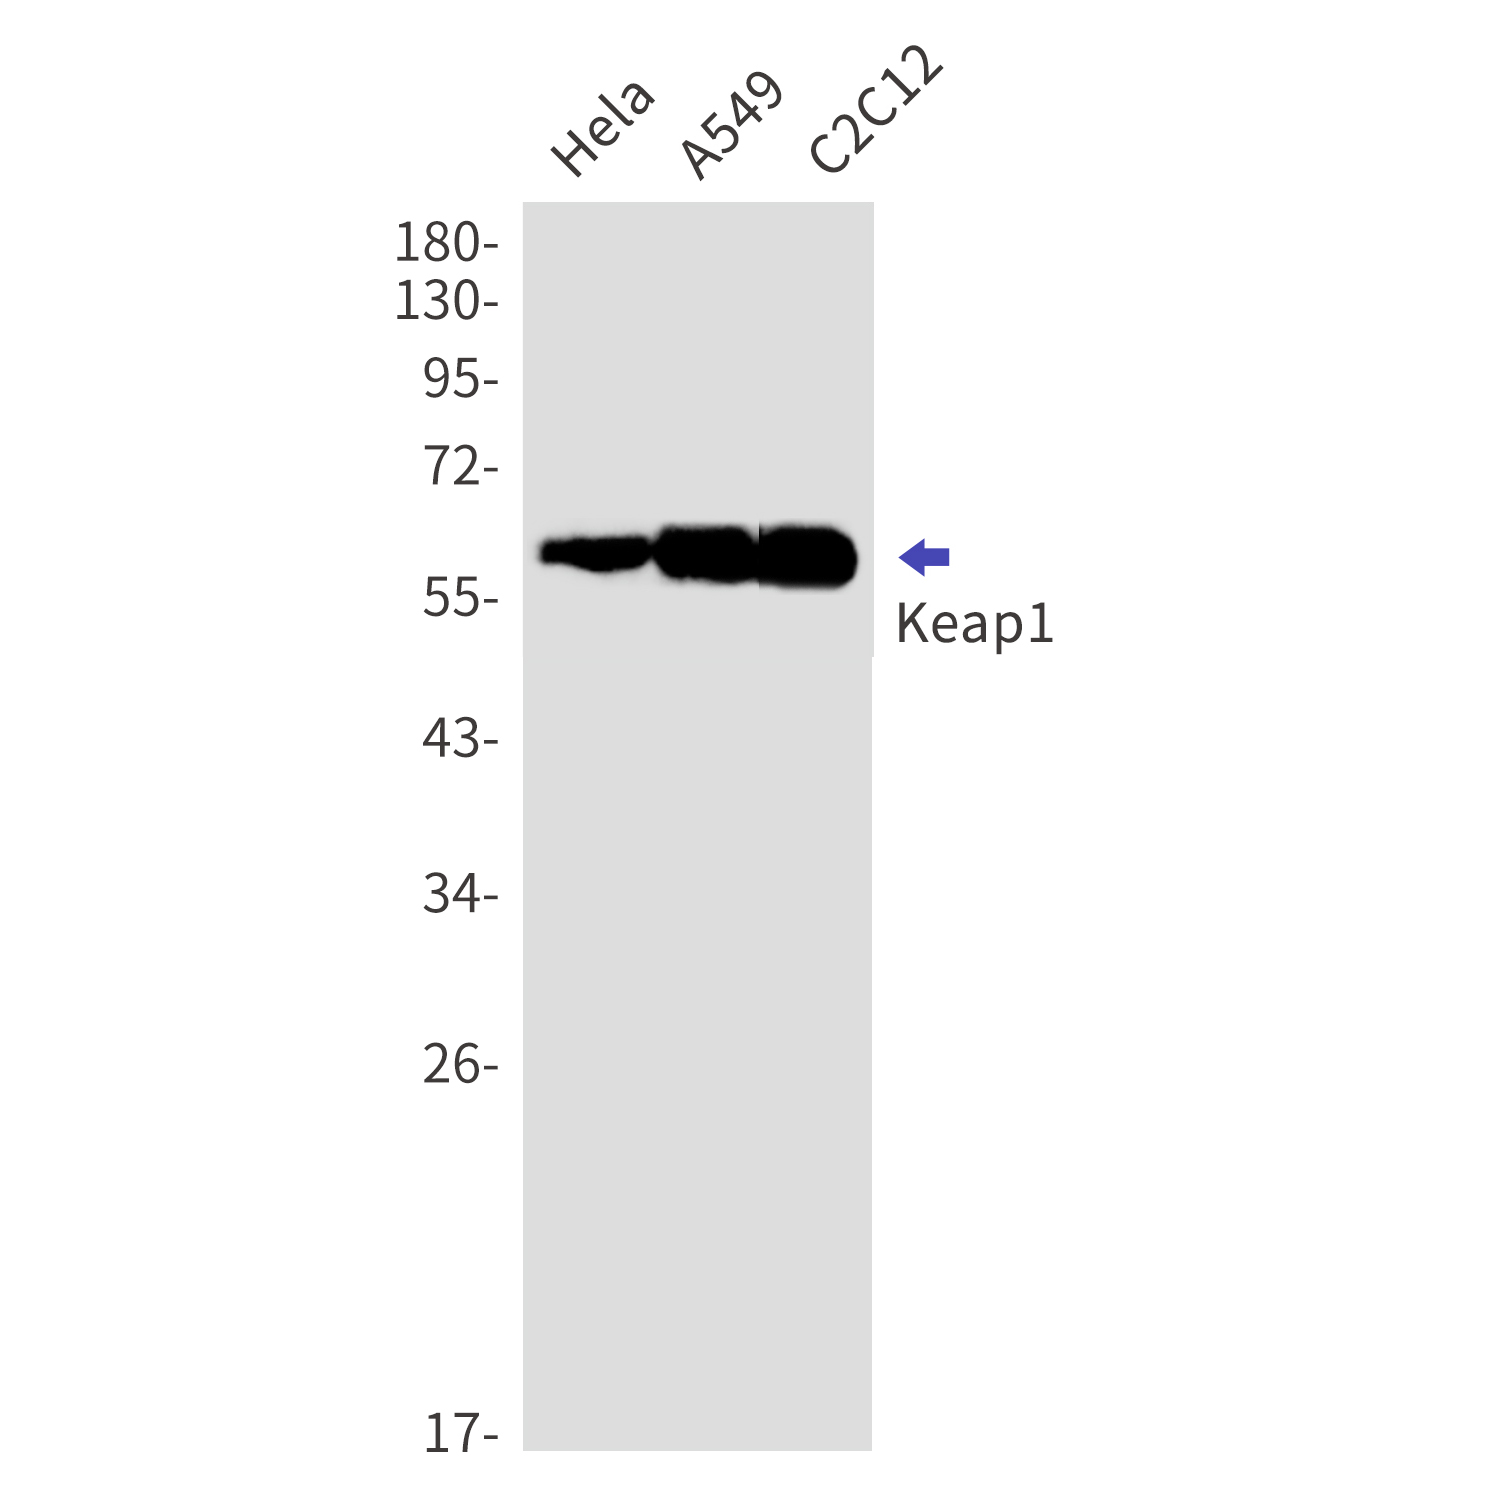 Western blot detection of Keap1 in Hela,A549,C2C12 cell lysates using Keap1 Rabbit mAb(1:1000 diluted).Predicted band size:70kDa.Observed band size:60-64kDa.